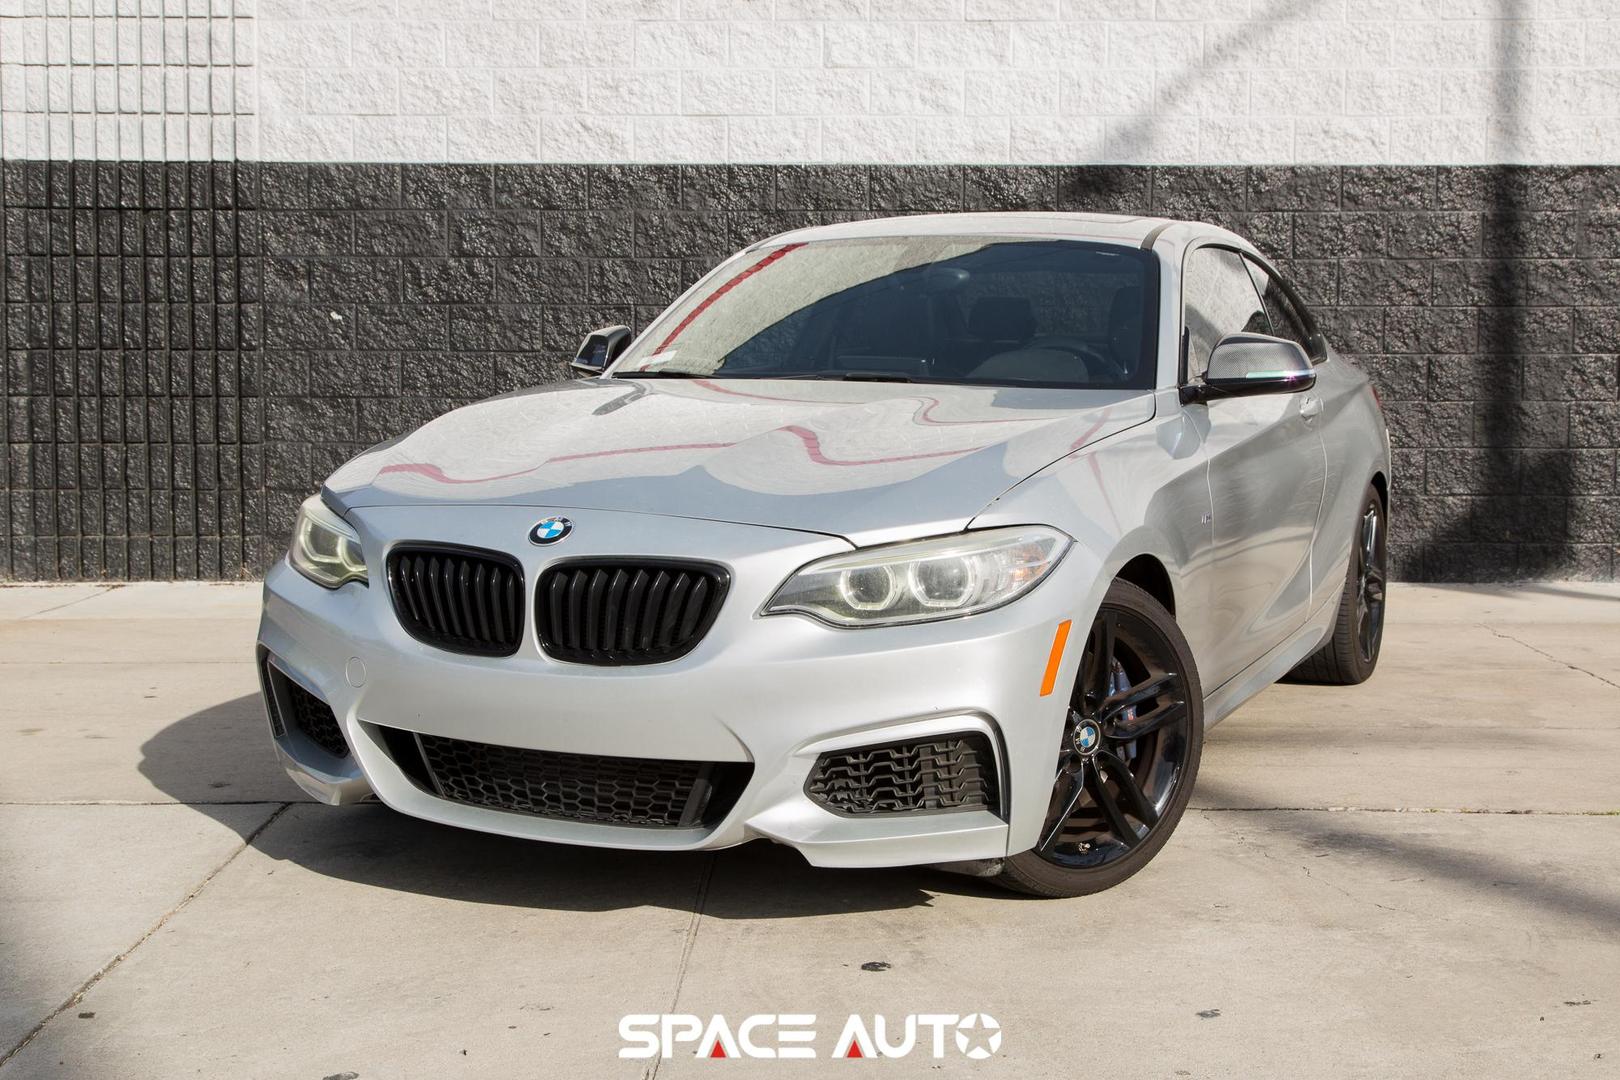 USED BMW 2 SERIES 2014 for sale in Los Angeles, CA | Space Auto Group Inc.